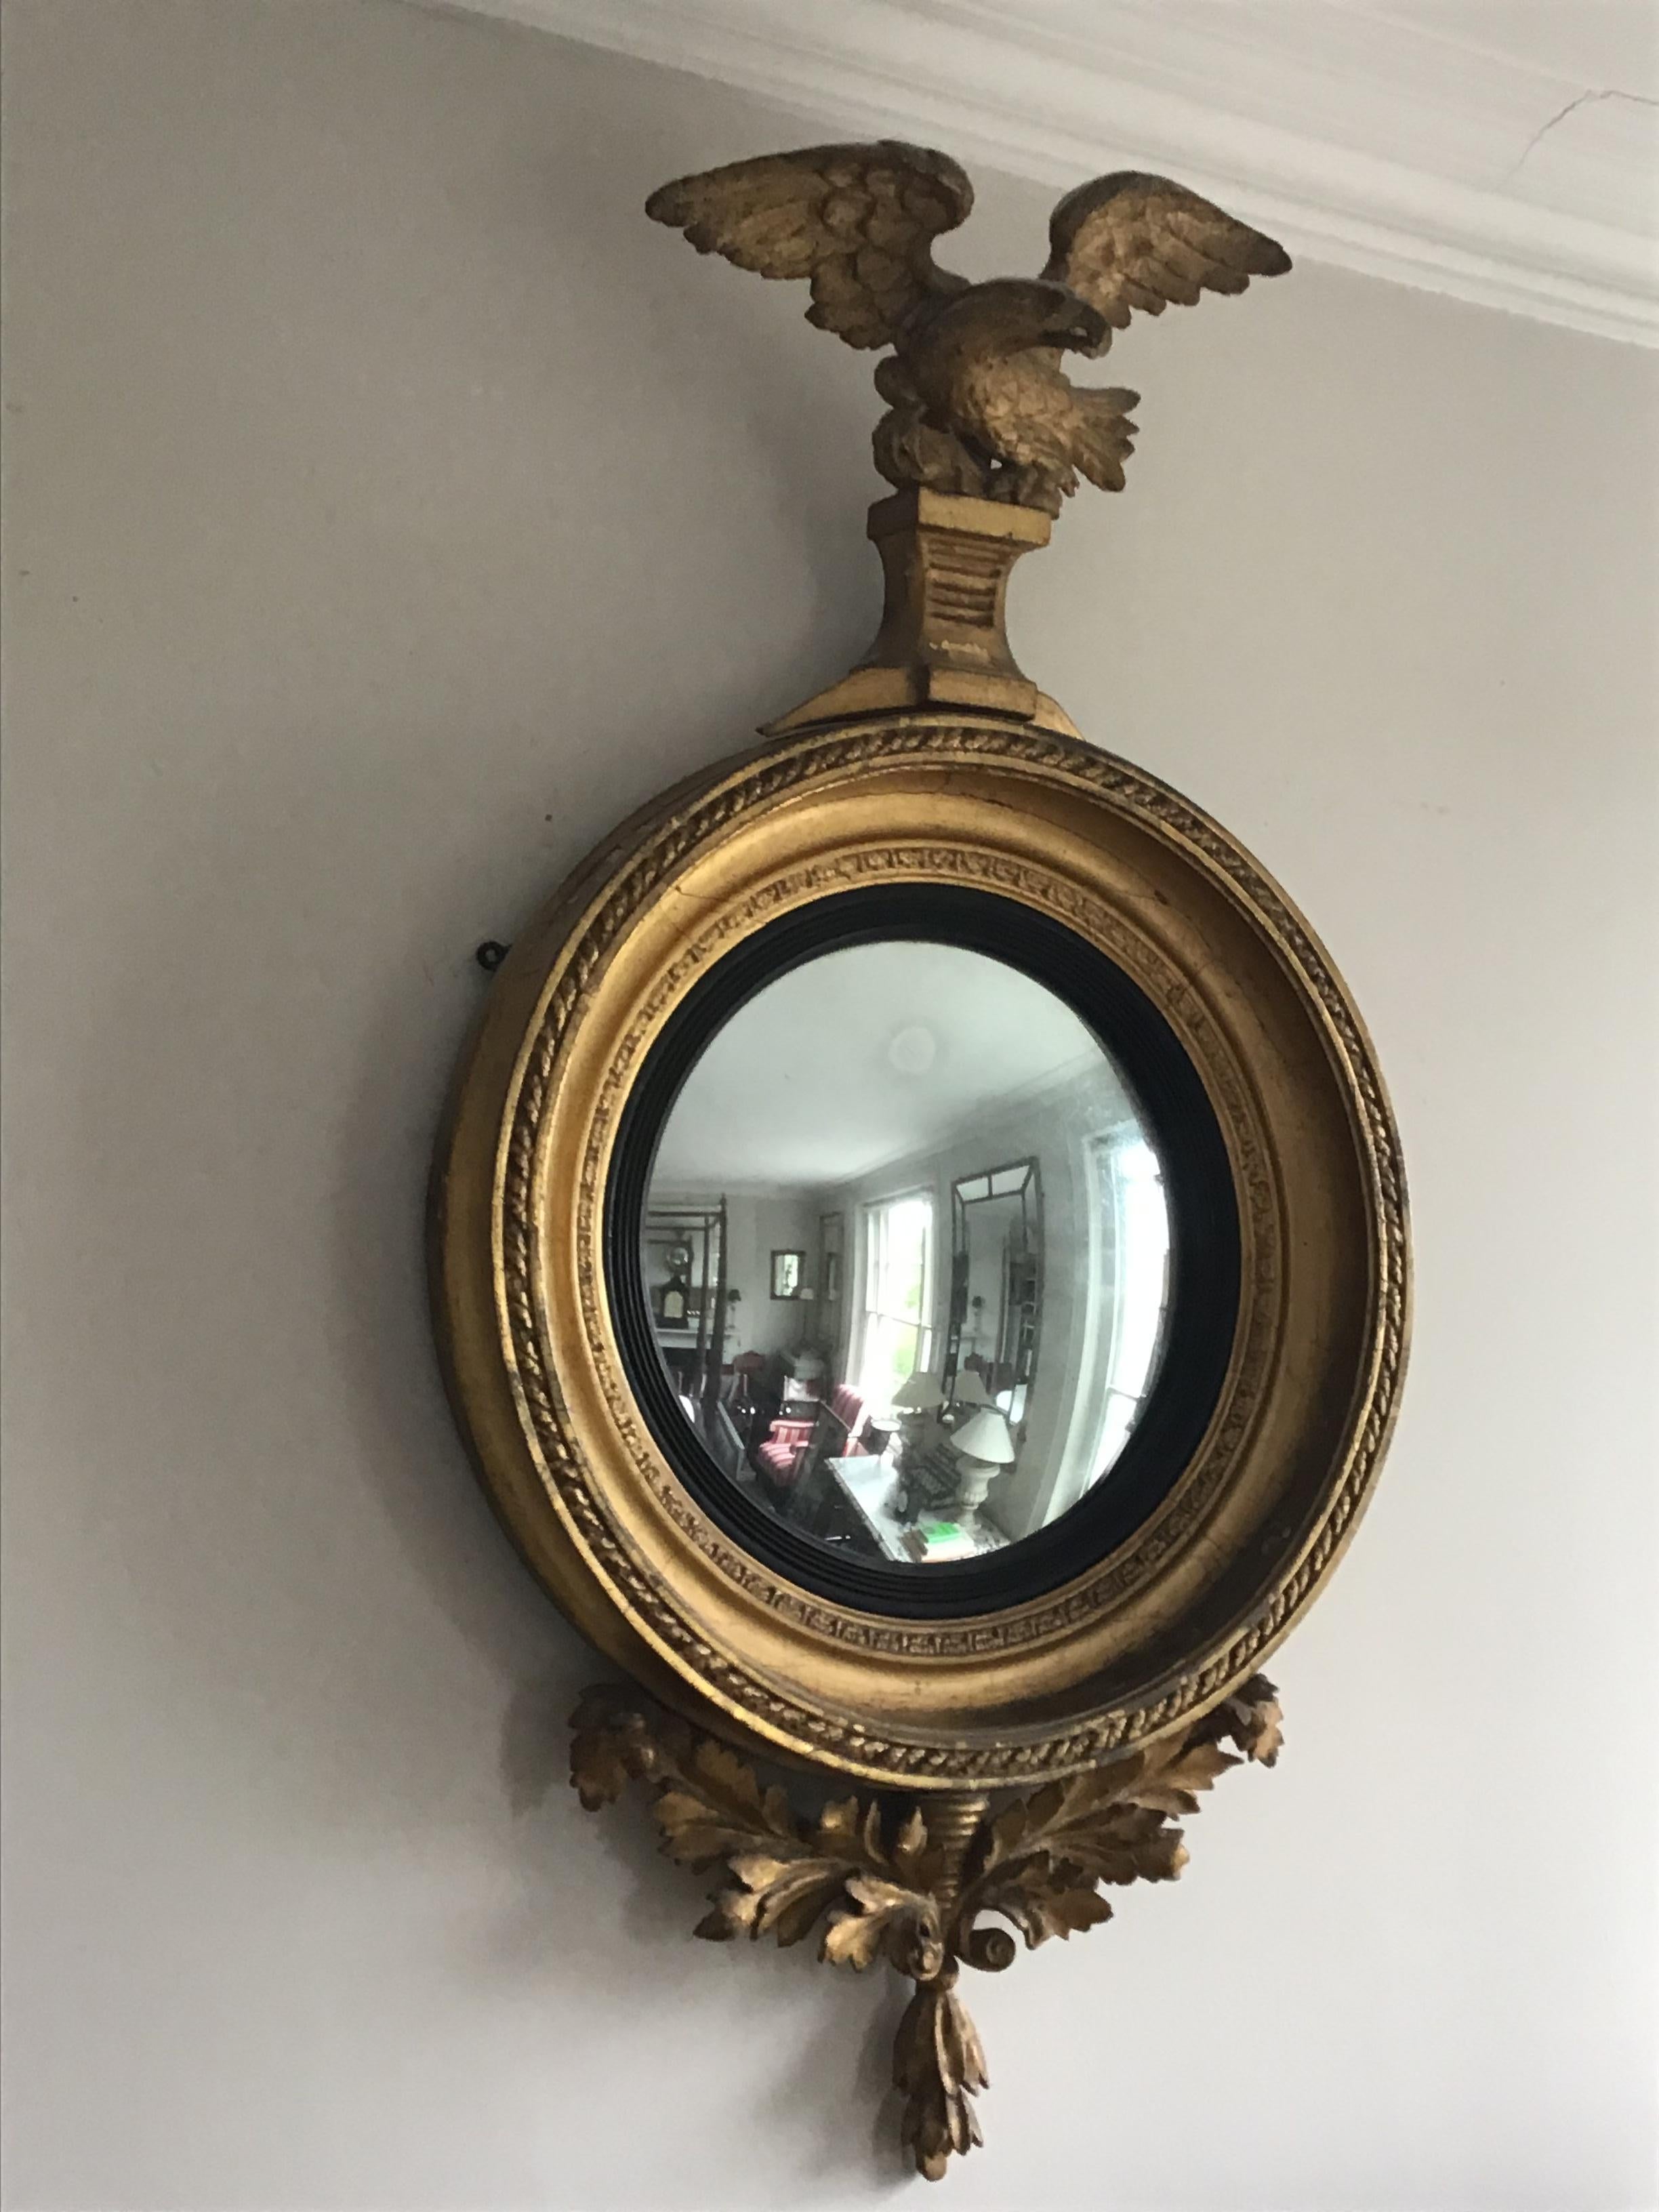 English Regency giltwood with carved spreading winged Eagle channelled foliate frame, convex plate and carved oak leaf foliate base, the convex plate with ebonised slip.
In Georgian England convex mirrors became popular, owners were intrigued by